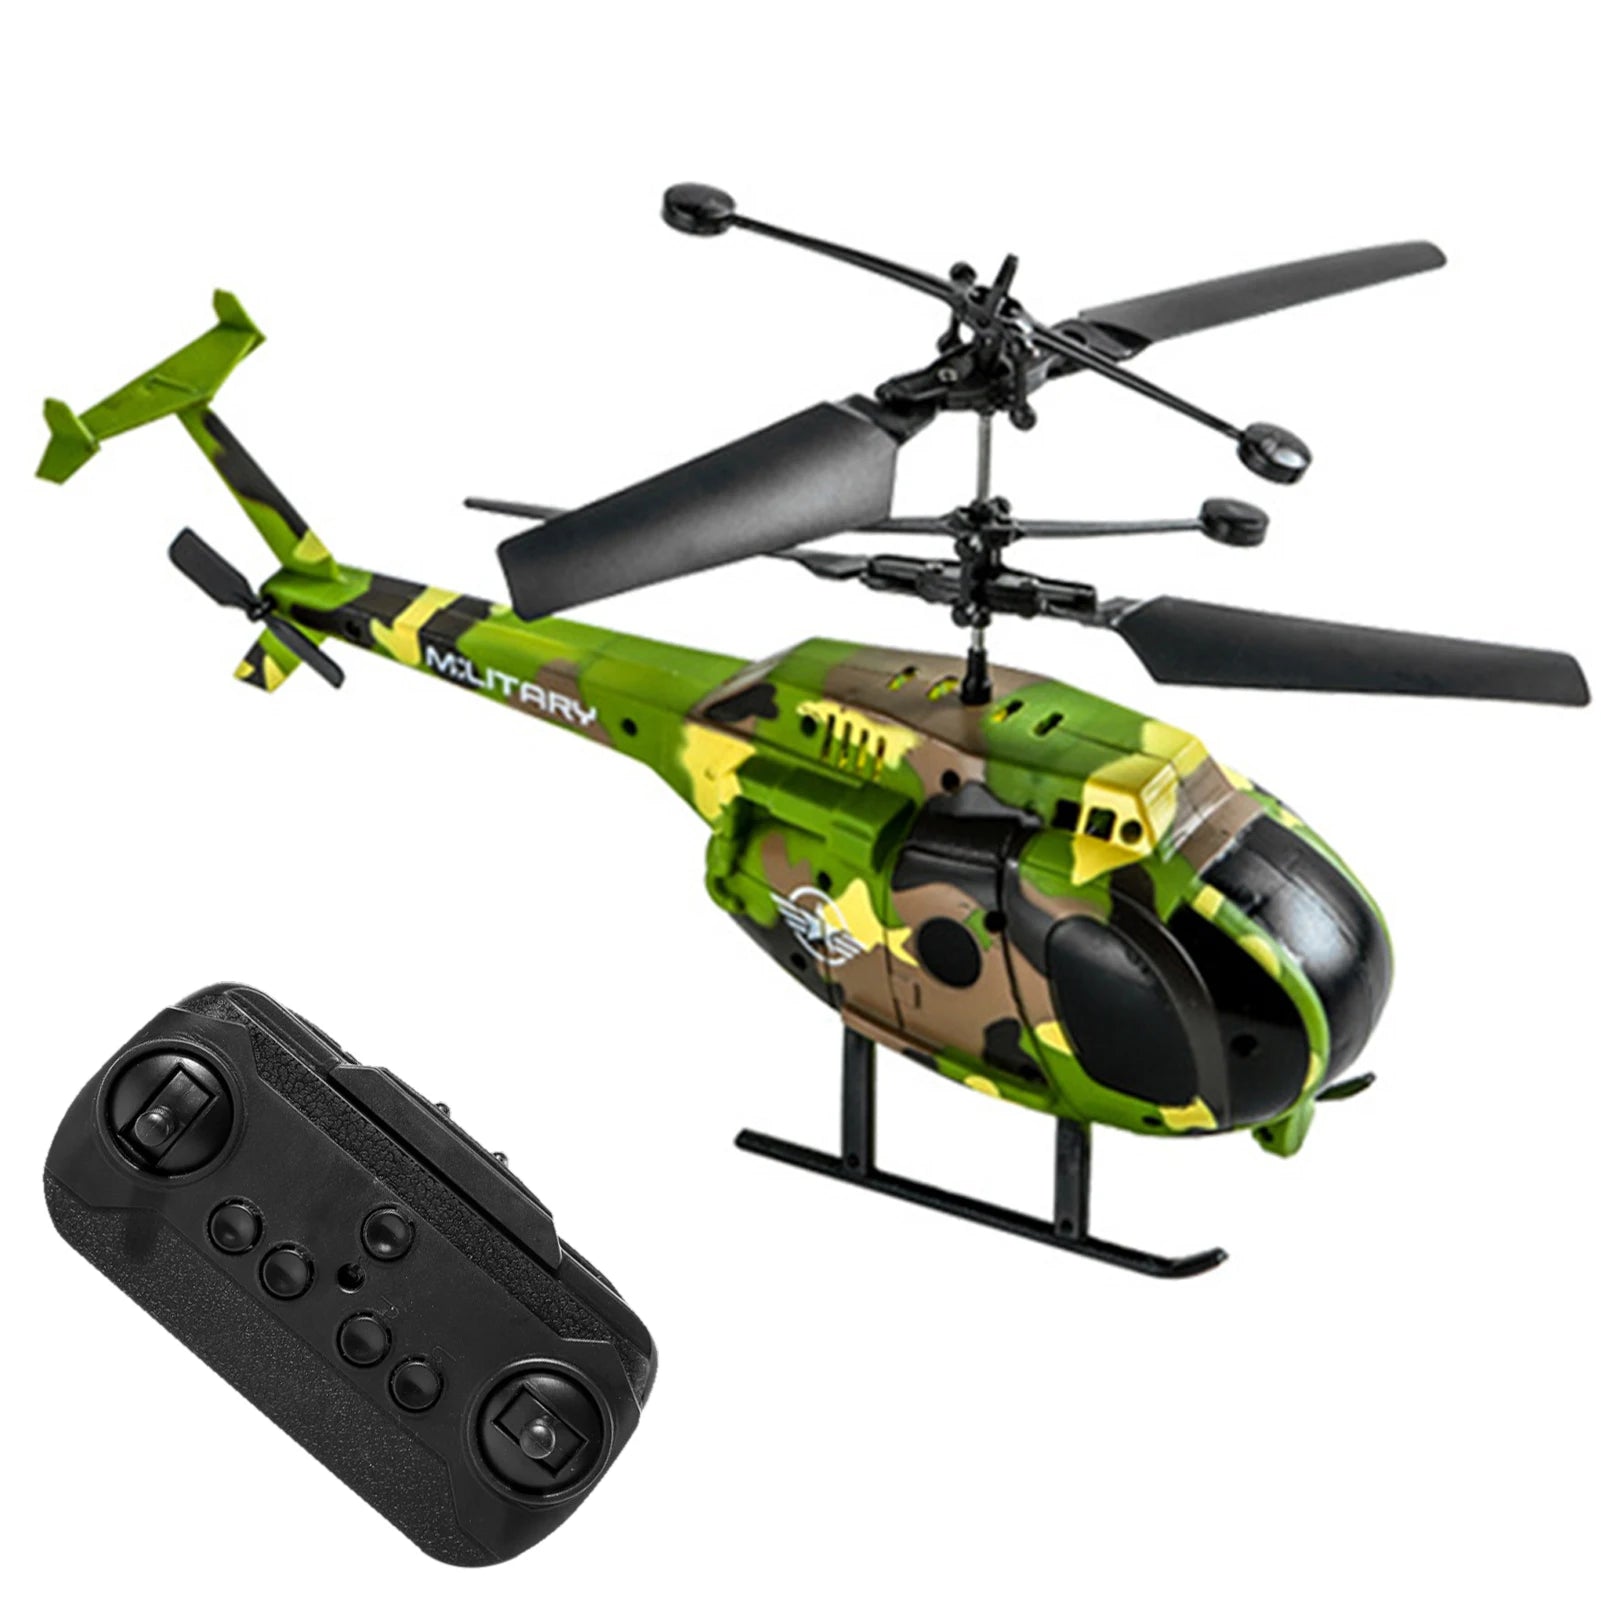 C135 RC Helicopter, the aircraft toy is easy to operate and is a perfect gift for your children .